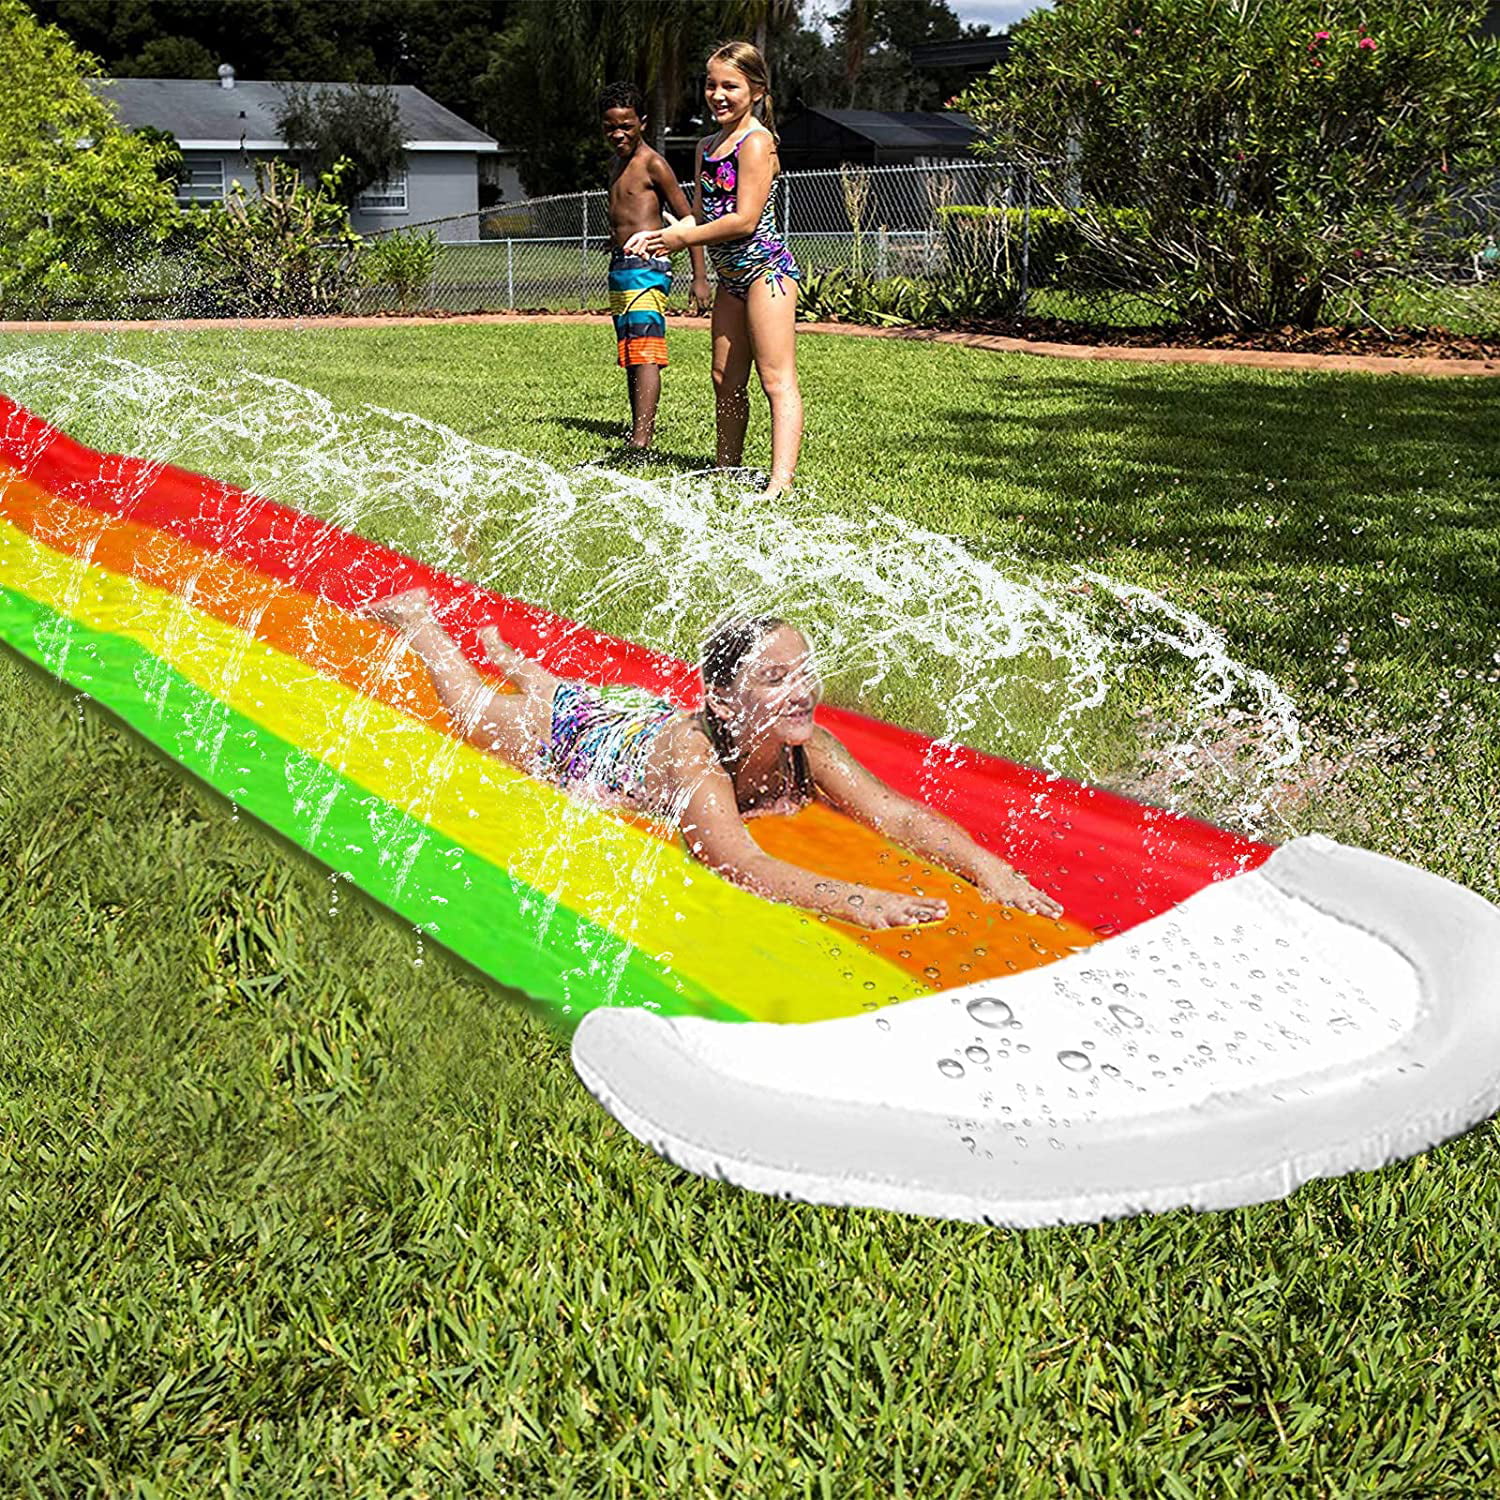 iGeeKid 14Ft Lawn Water Slides Rainbow Silp Slide with Spraying and Inflatable Crash Pad for Kids Boys Girls Children Lawn Garden Play Swimming Pool Games Outdoor Party Water Toys 